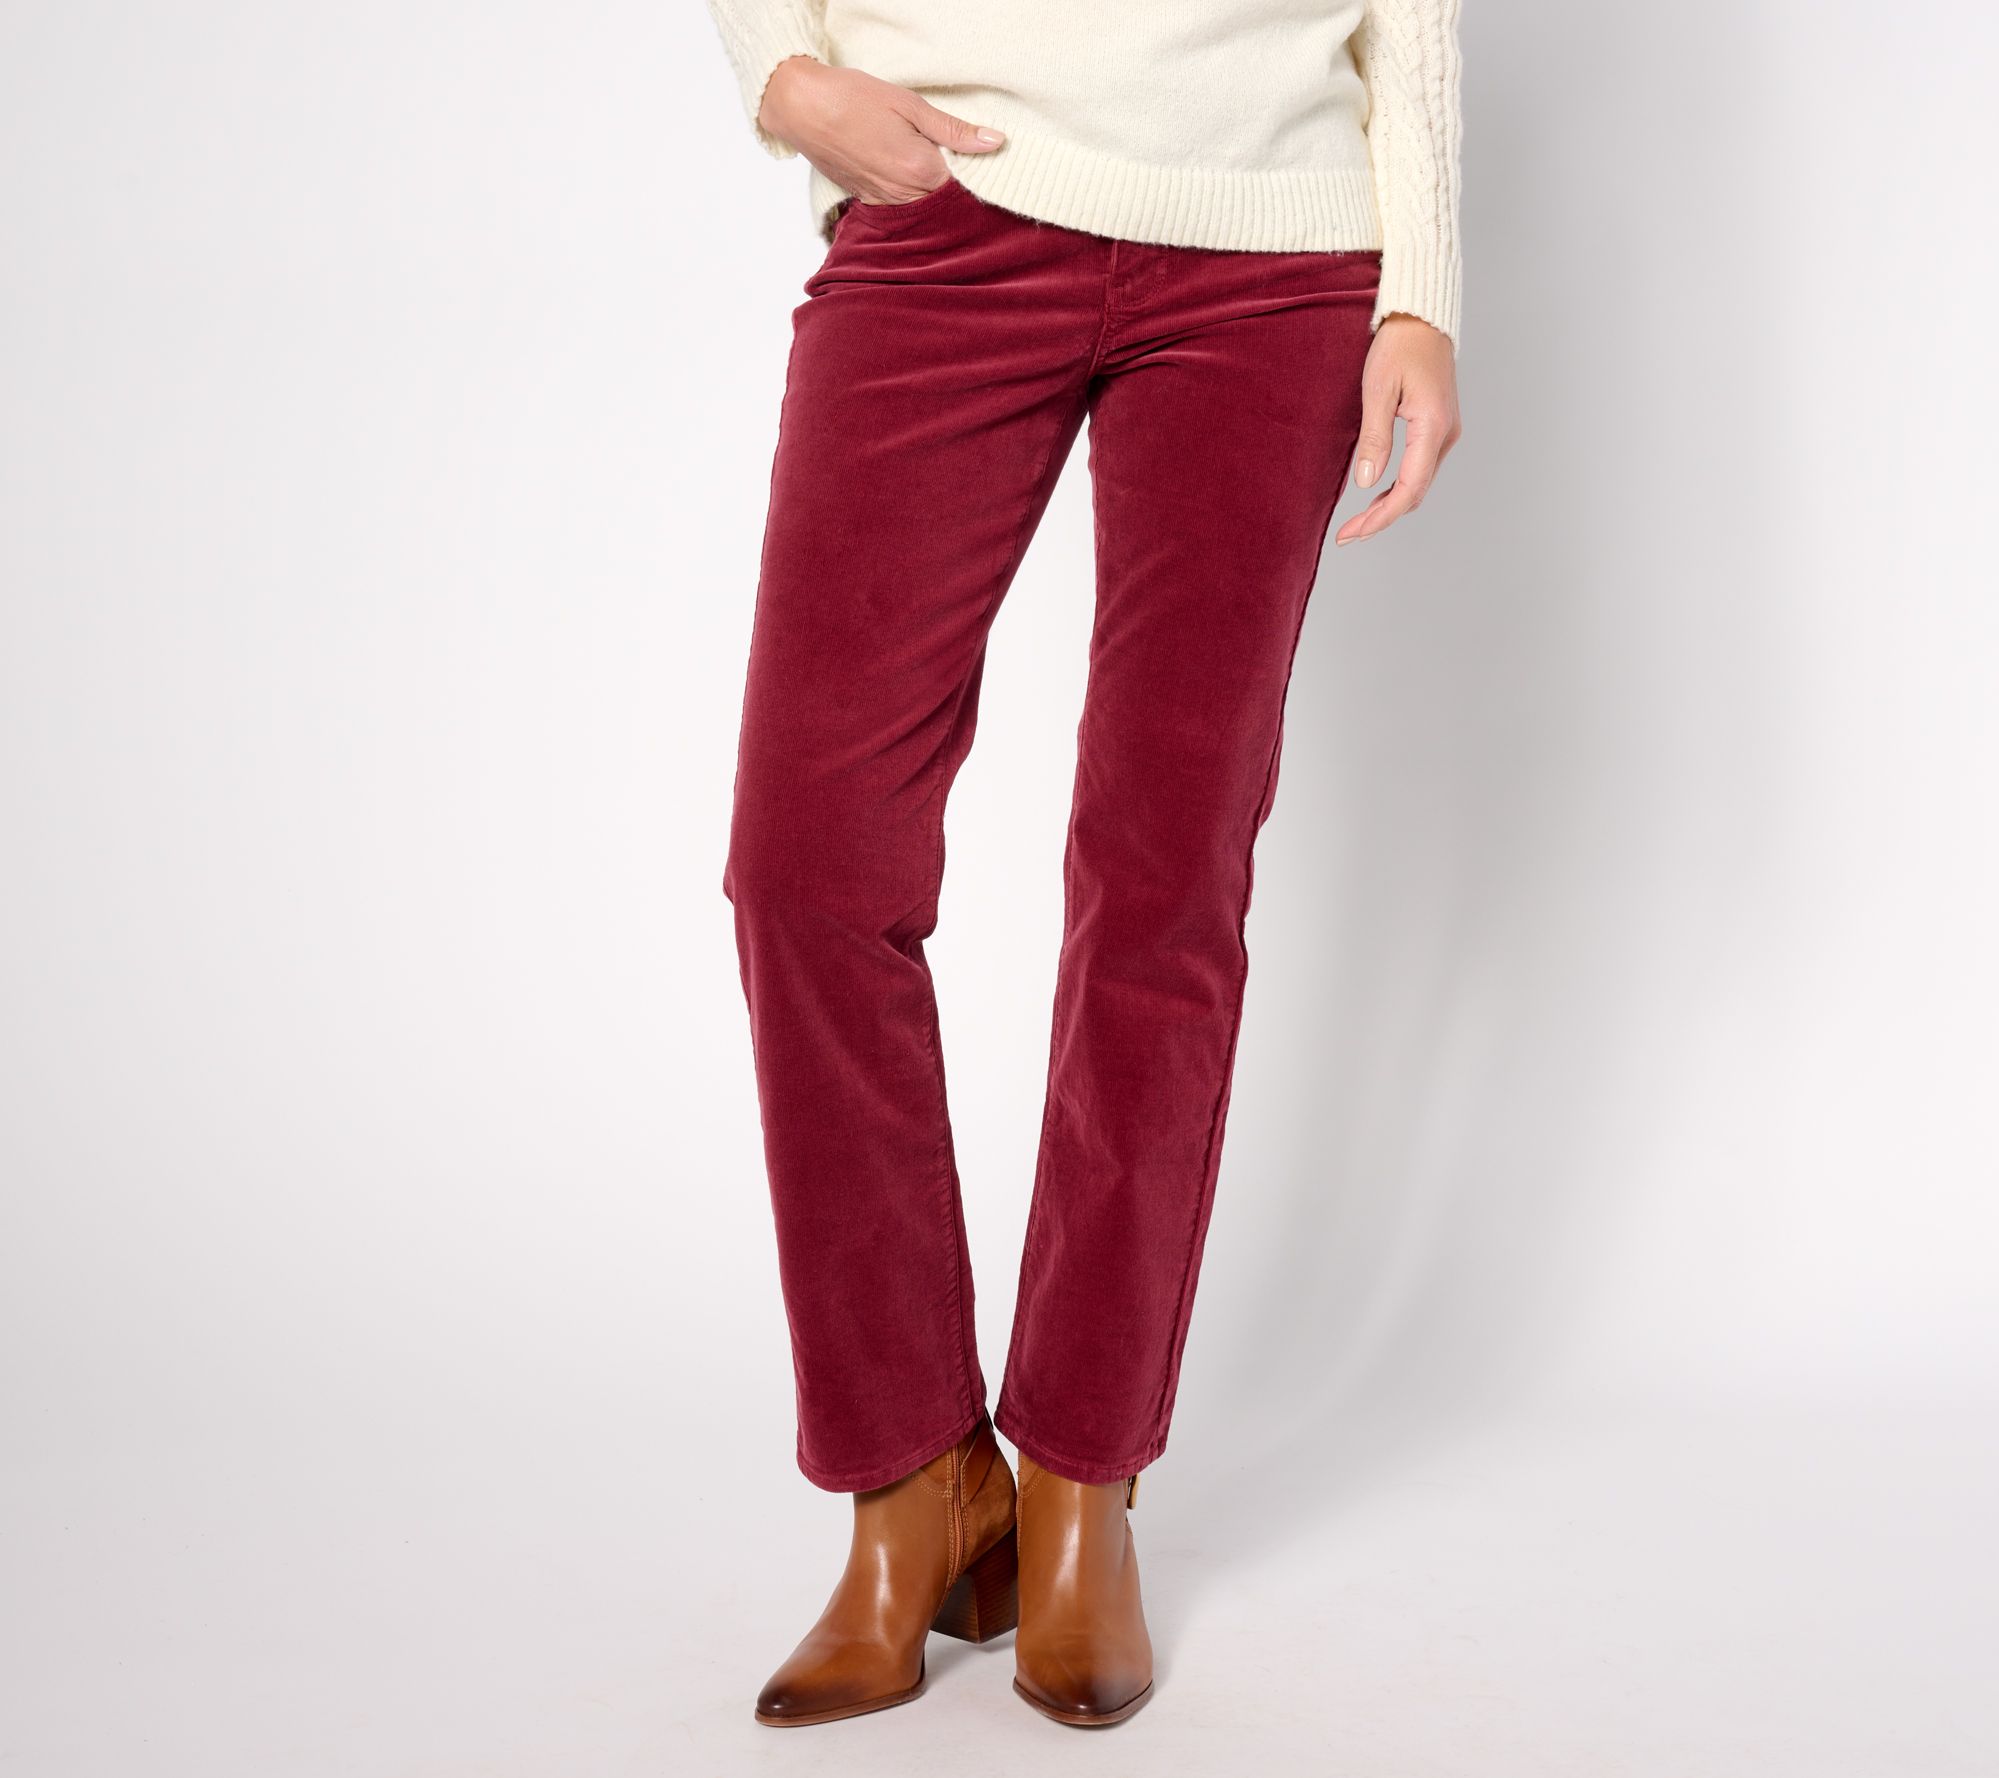 NYDJ Marilyn Straight in Wale Baby Corduroy Pants- Cranberry 